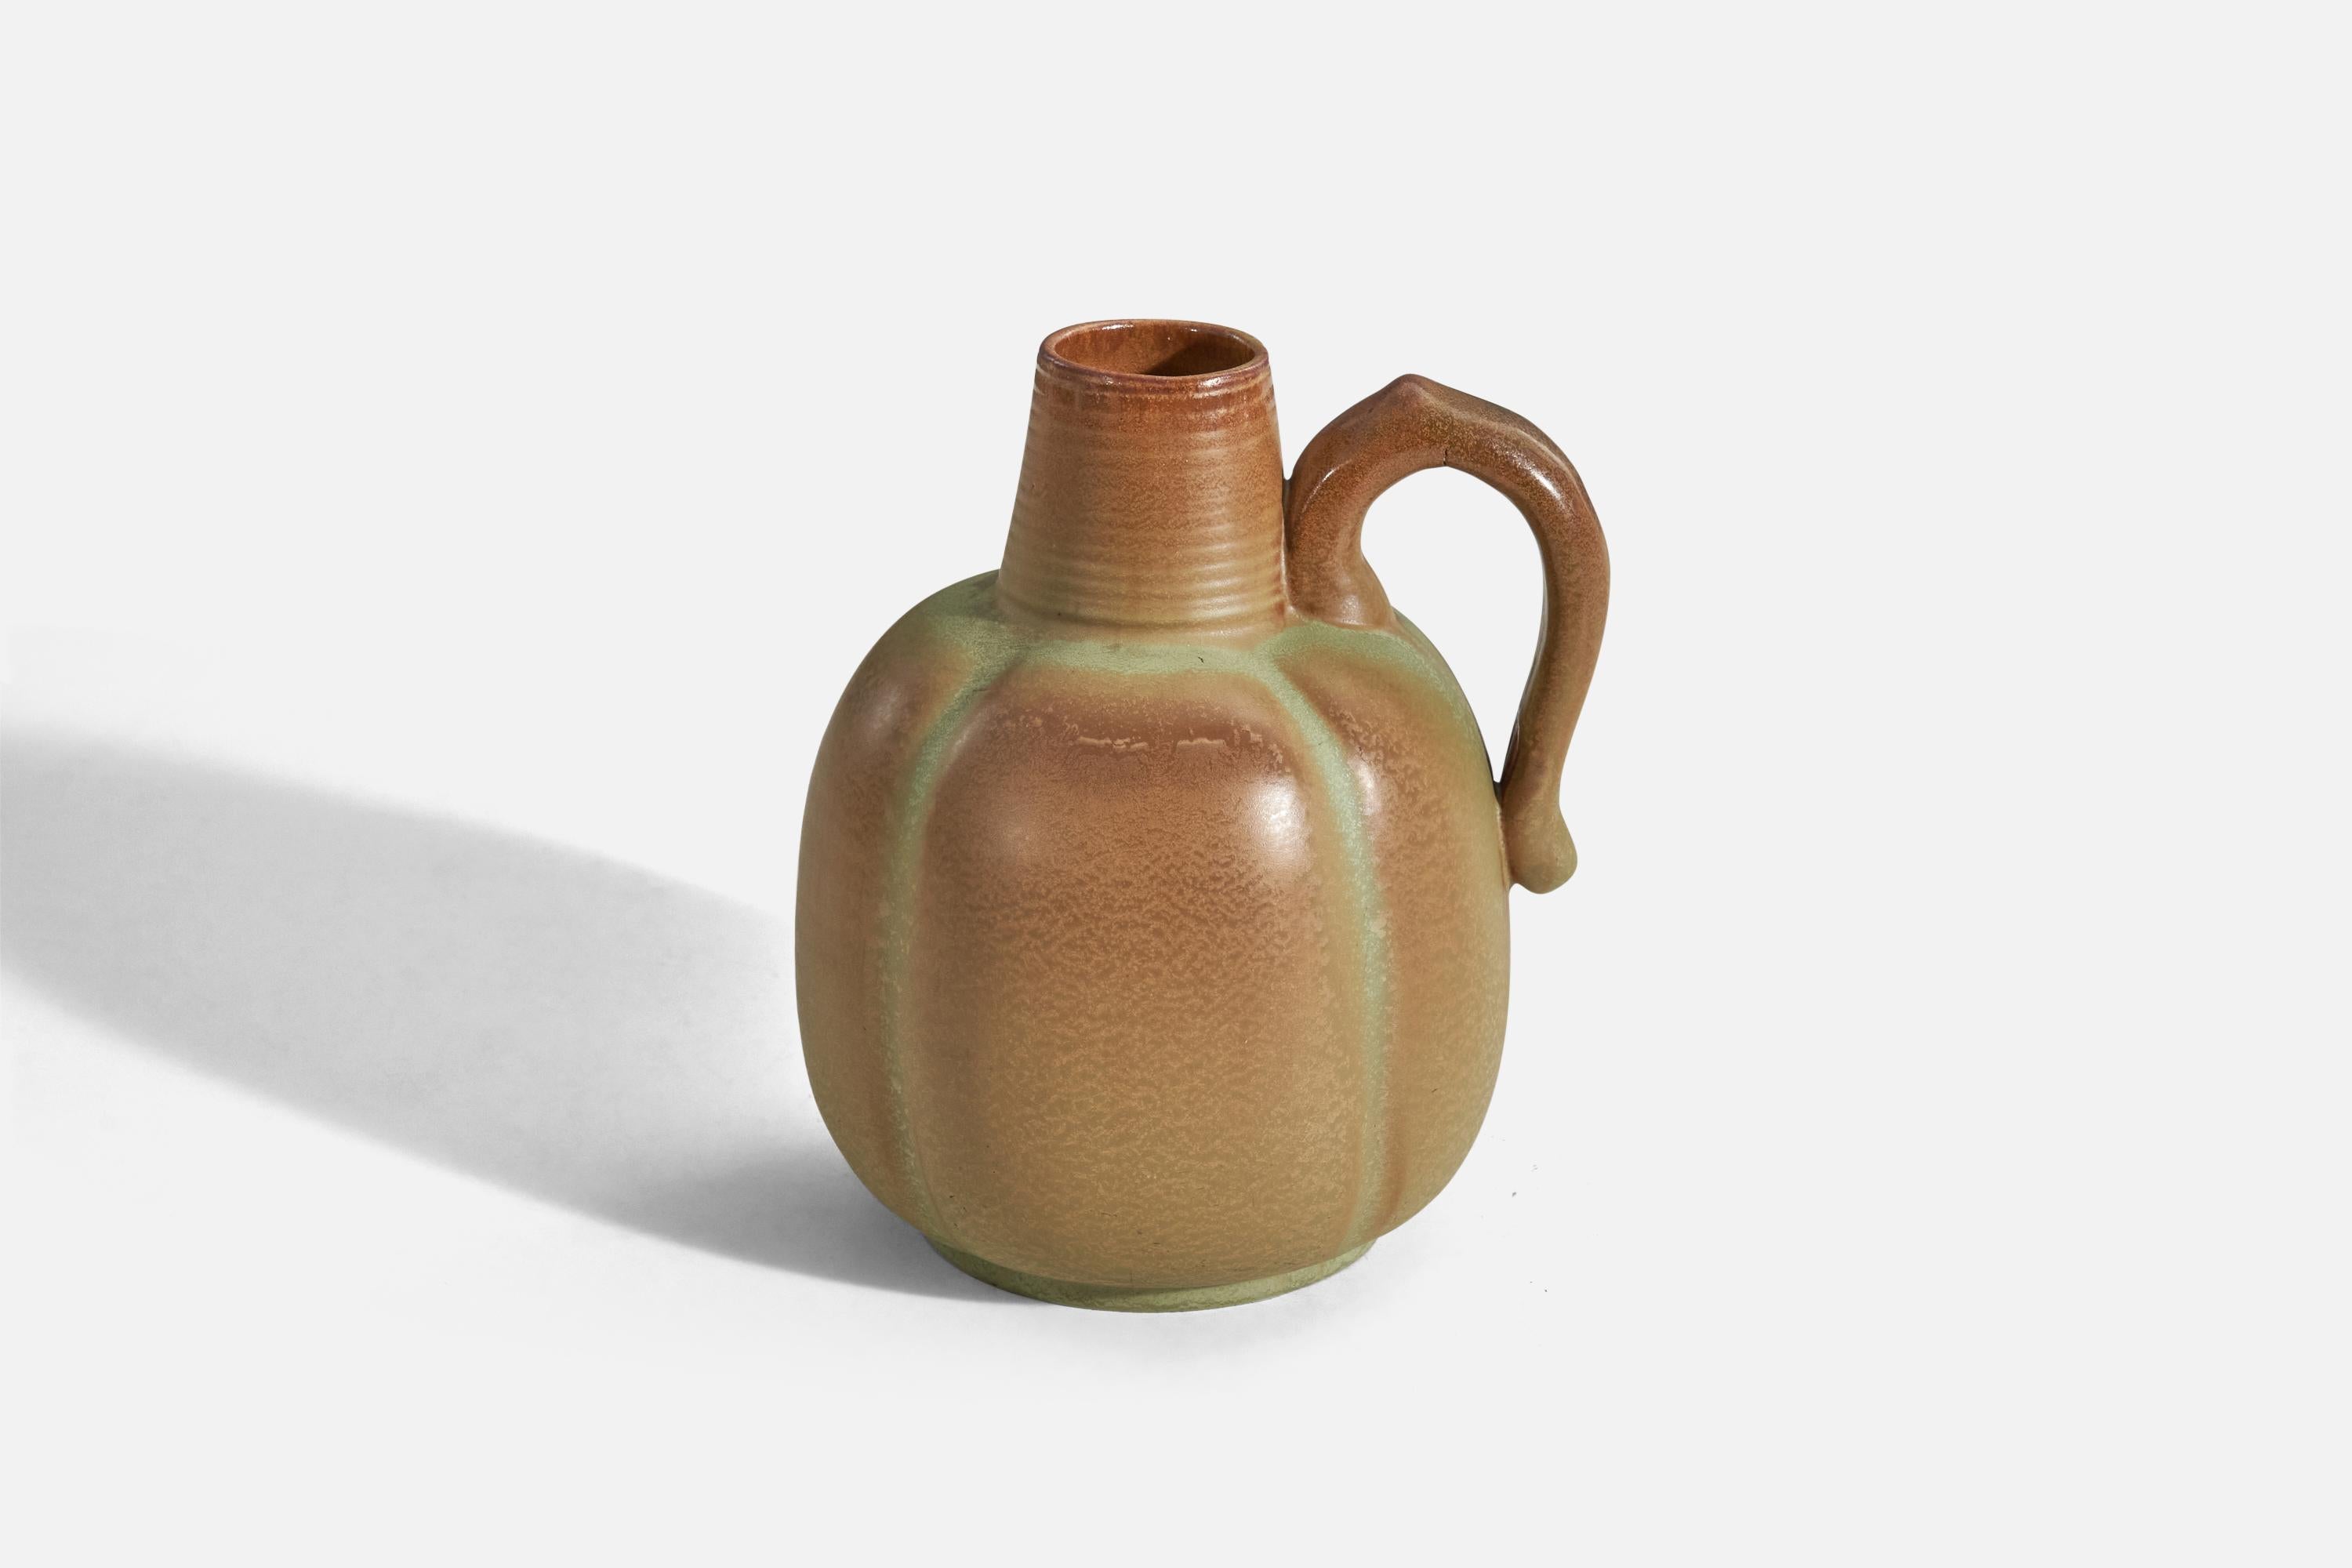 A brown and green, glazed stoneware vase designed and produced by Andersson & Johansson, Höganäs, Sweden, c. 1940s.